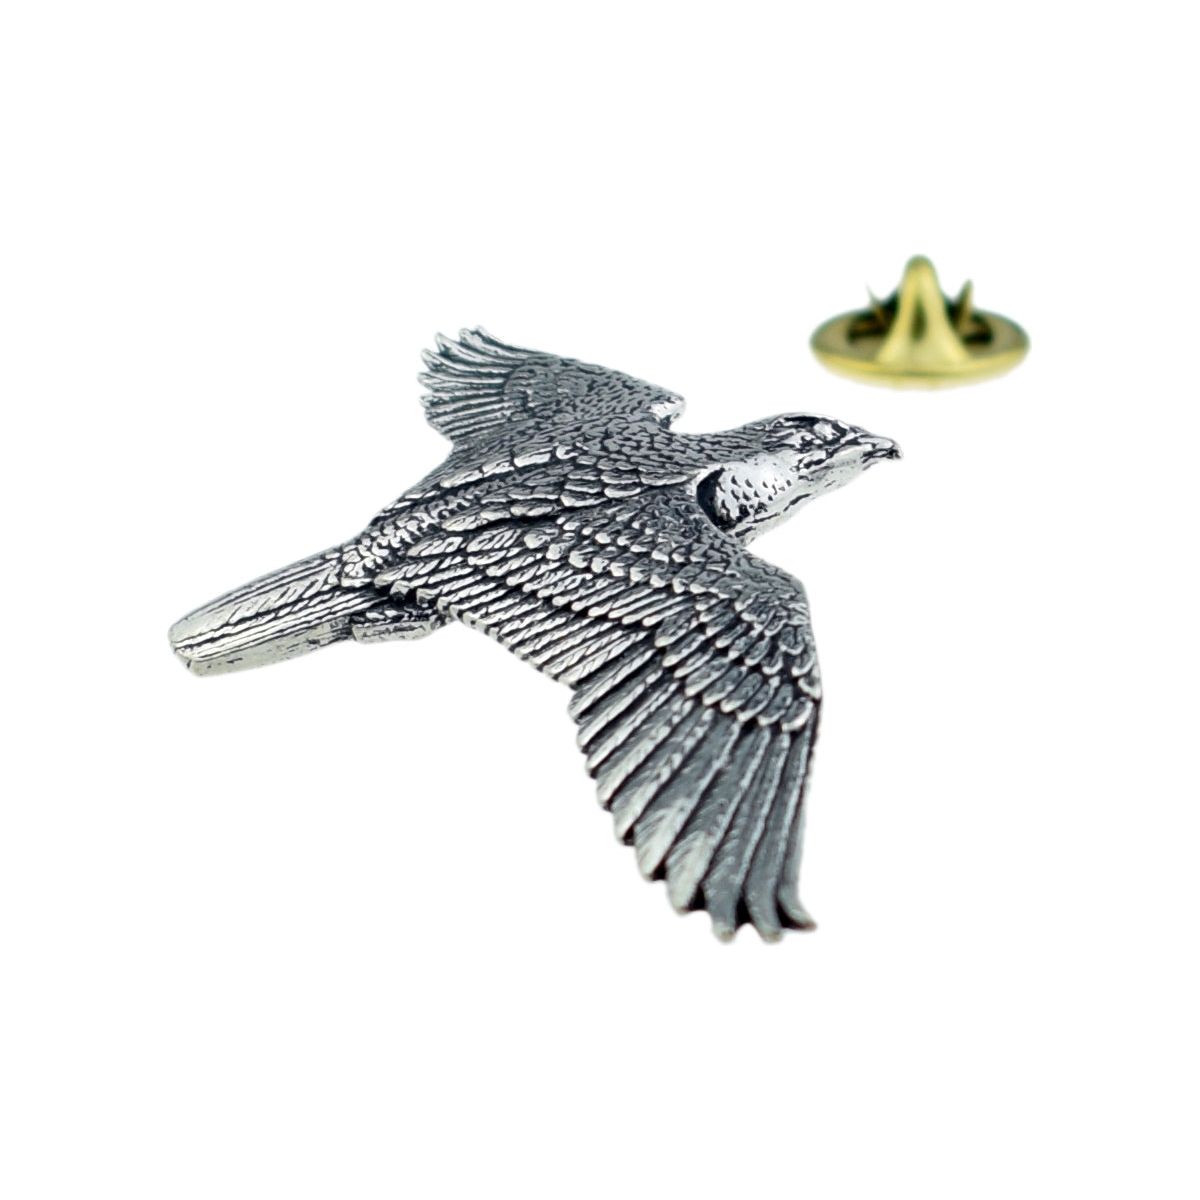 Swooping Falcon English pewter Lapel Pin Badge - Ashton and Finch